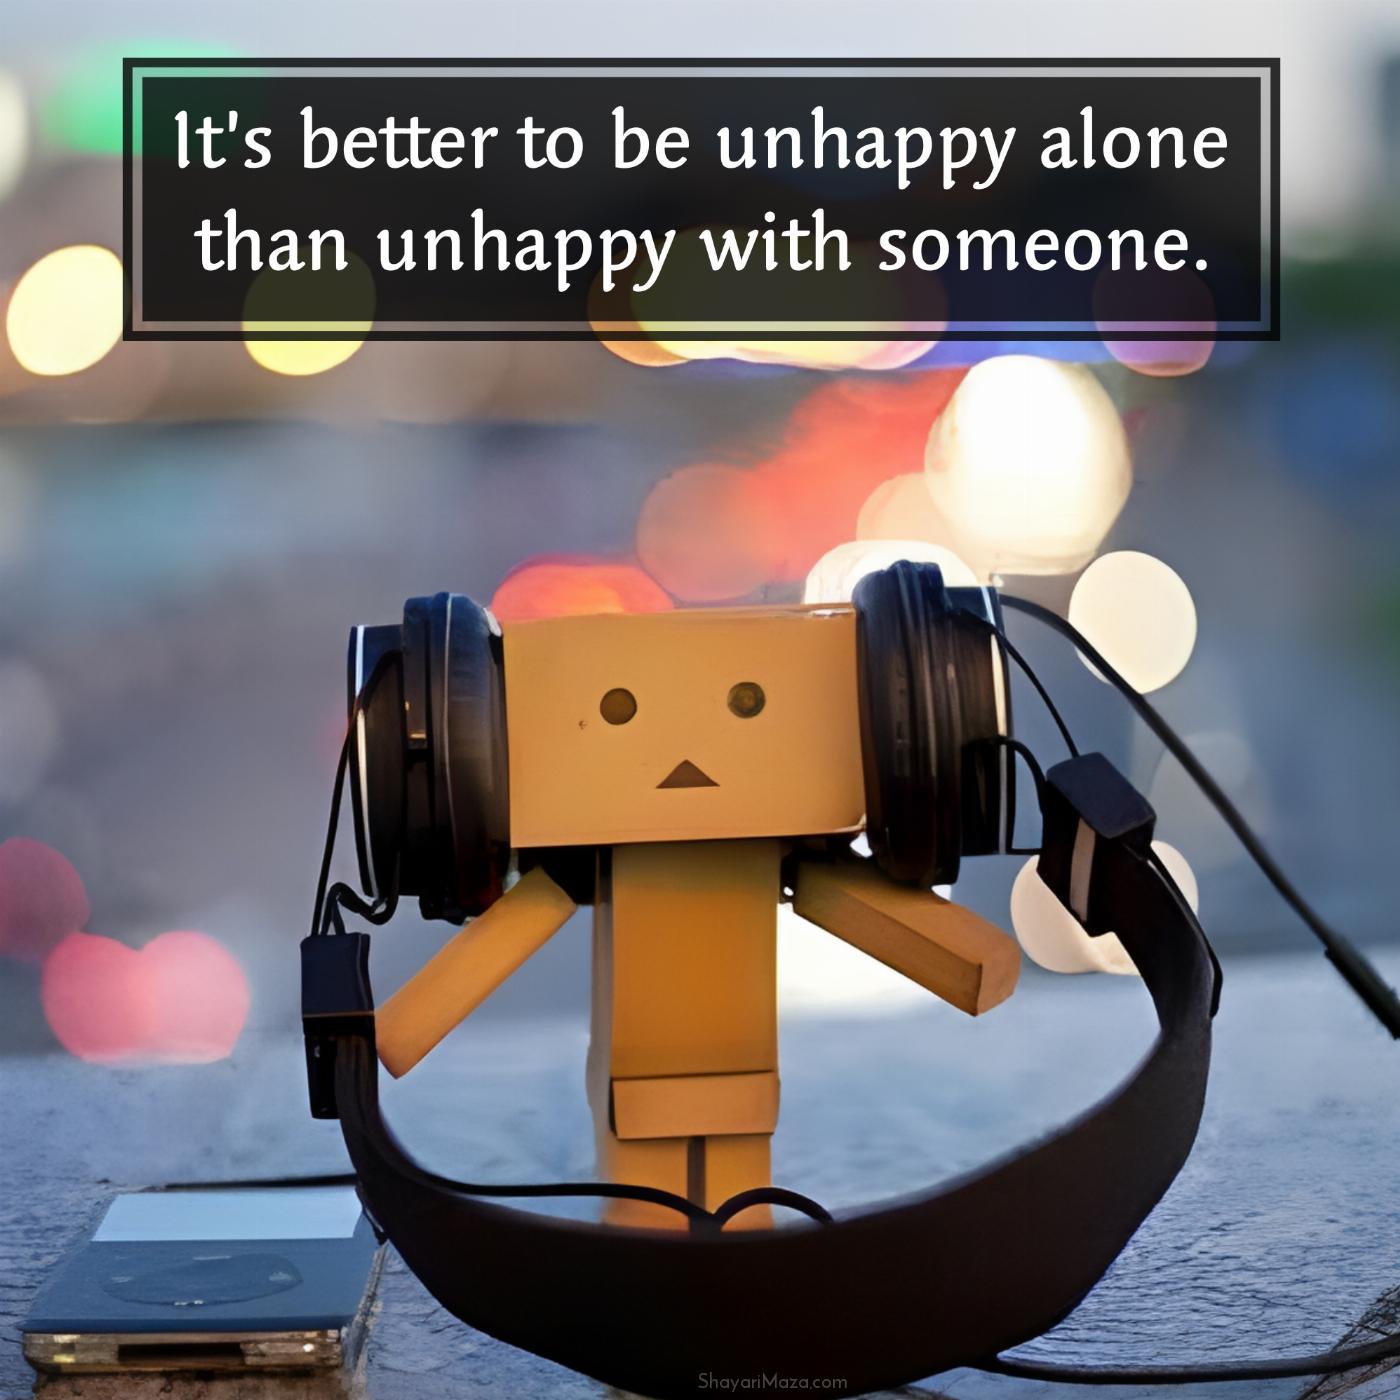 Its better to be unhappy alone than unhappy with someone